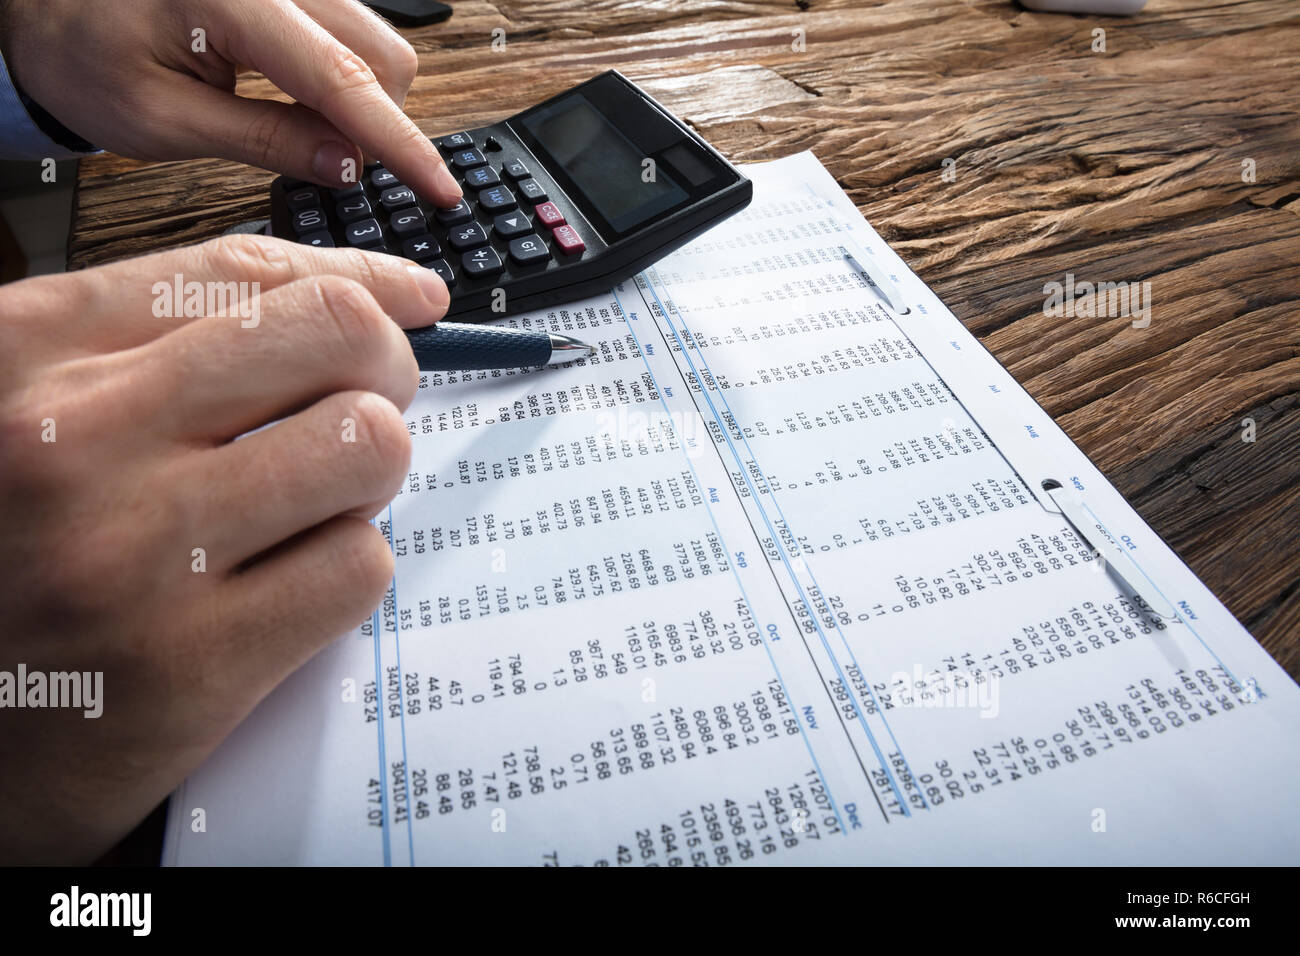 Businessman's Hand Calculating Financial Data With Calculator Stock Photo -  Alamy